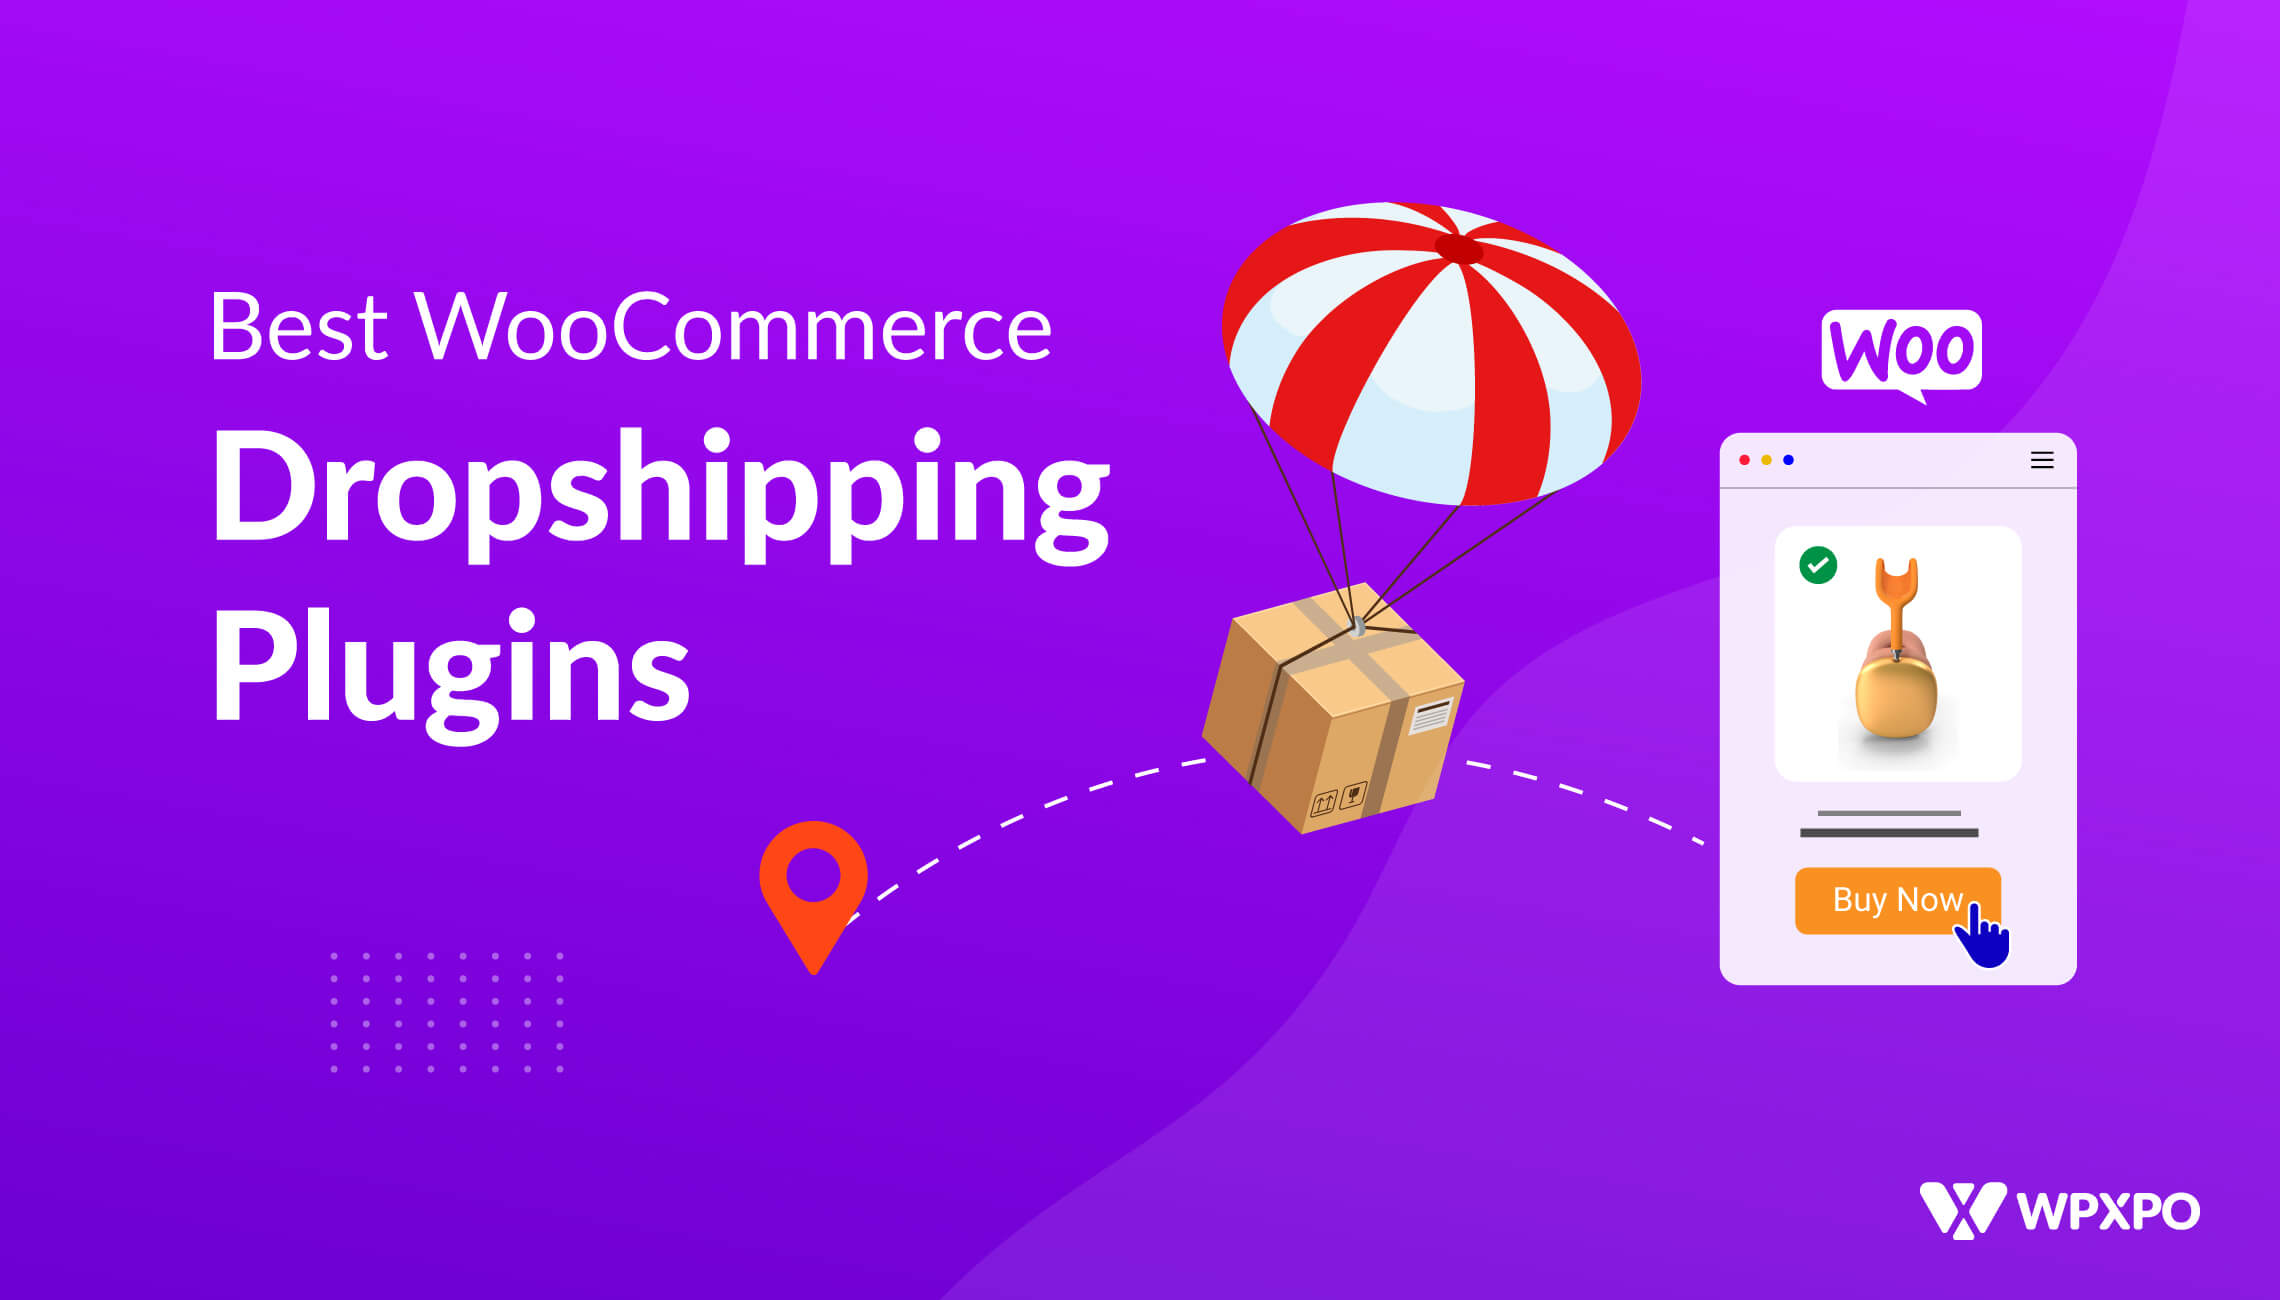 13 Best WooCommerce Dropshipping Plugins [Grow Your Dropshipping Business!]